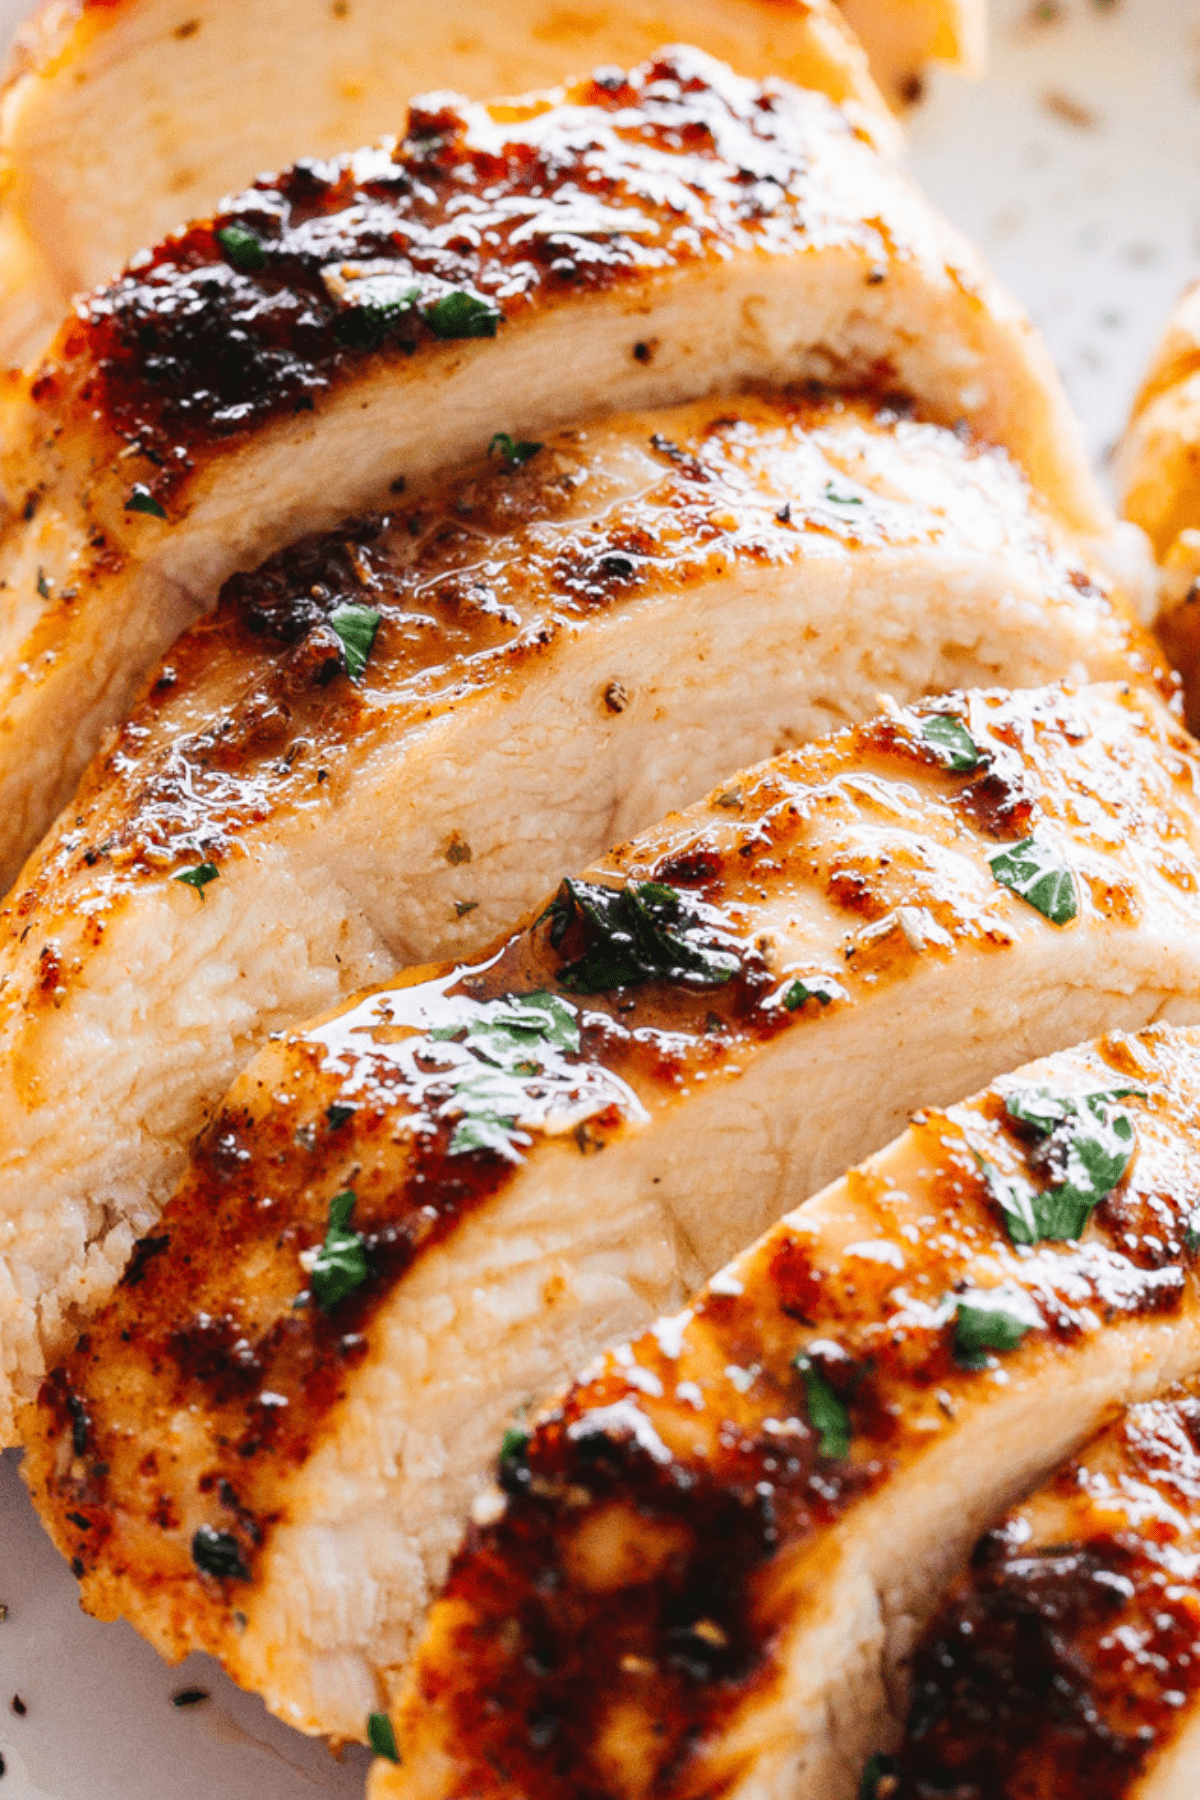 close-up shot of a chicken breast cut into horizontal slices.